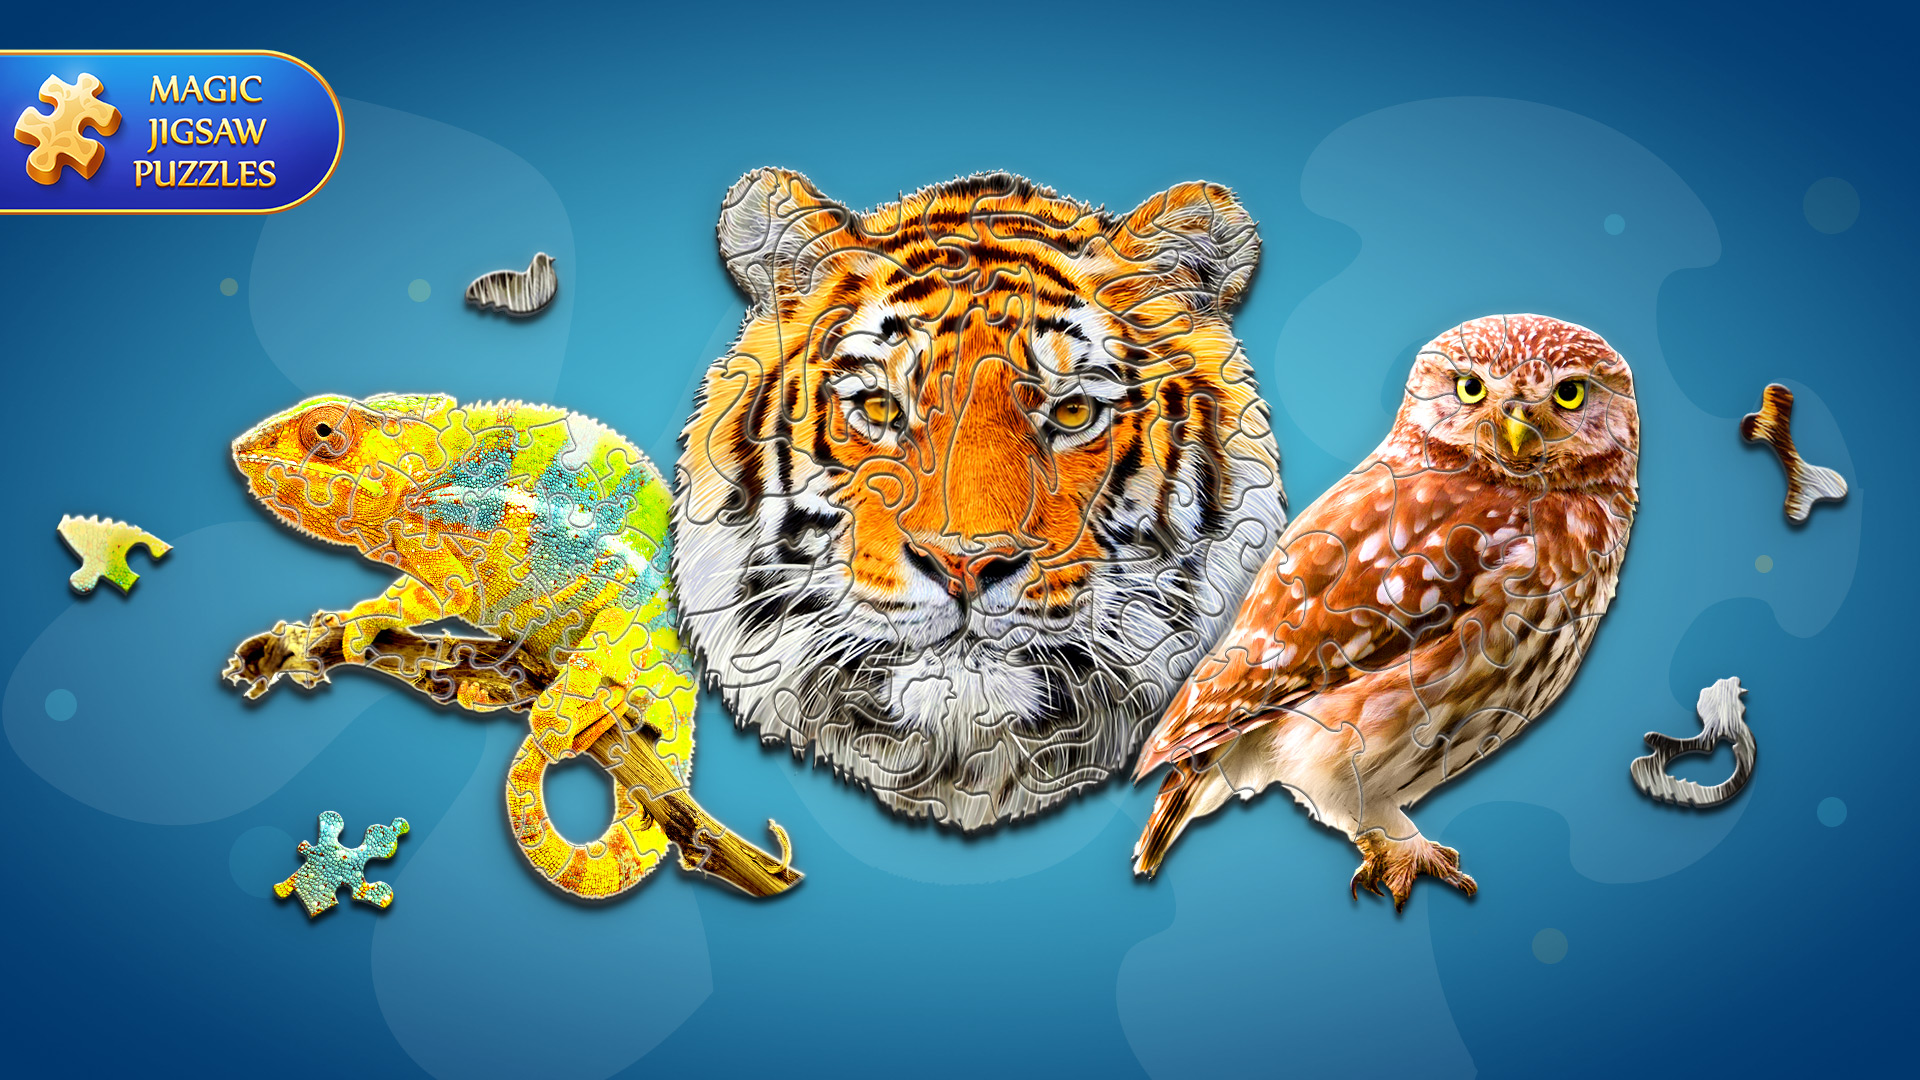 Magic Jigsaw Puzzles - Download & Play for Free Here